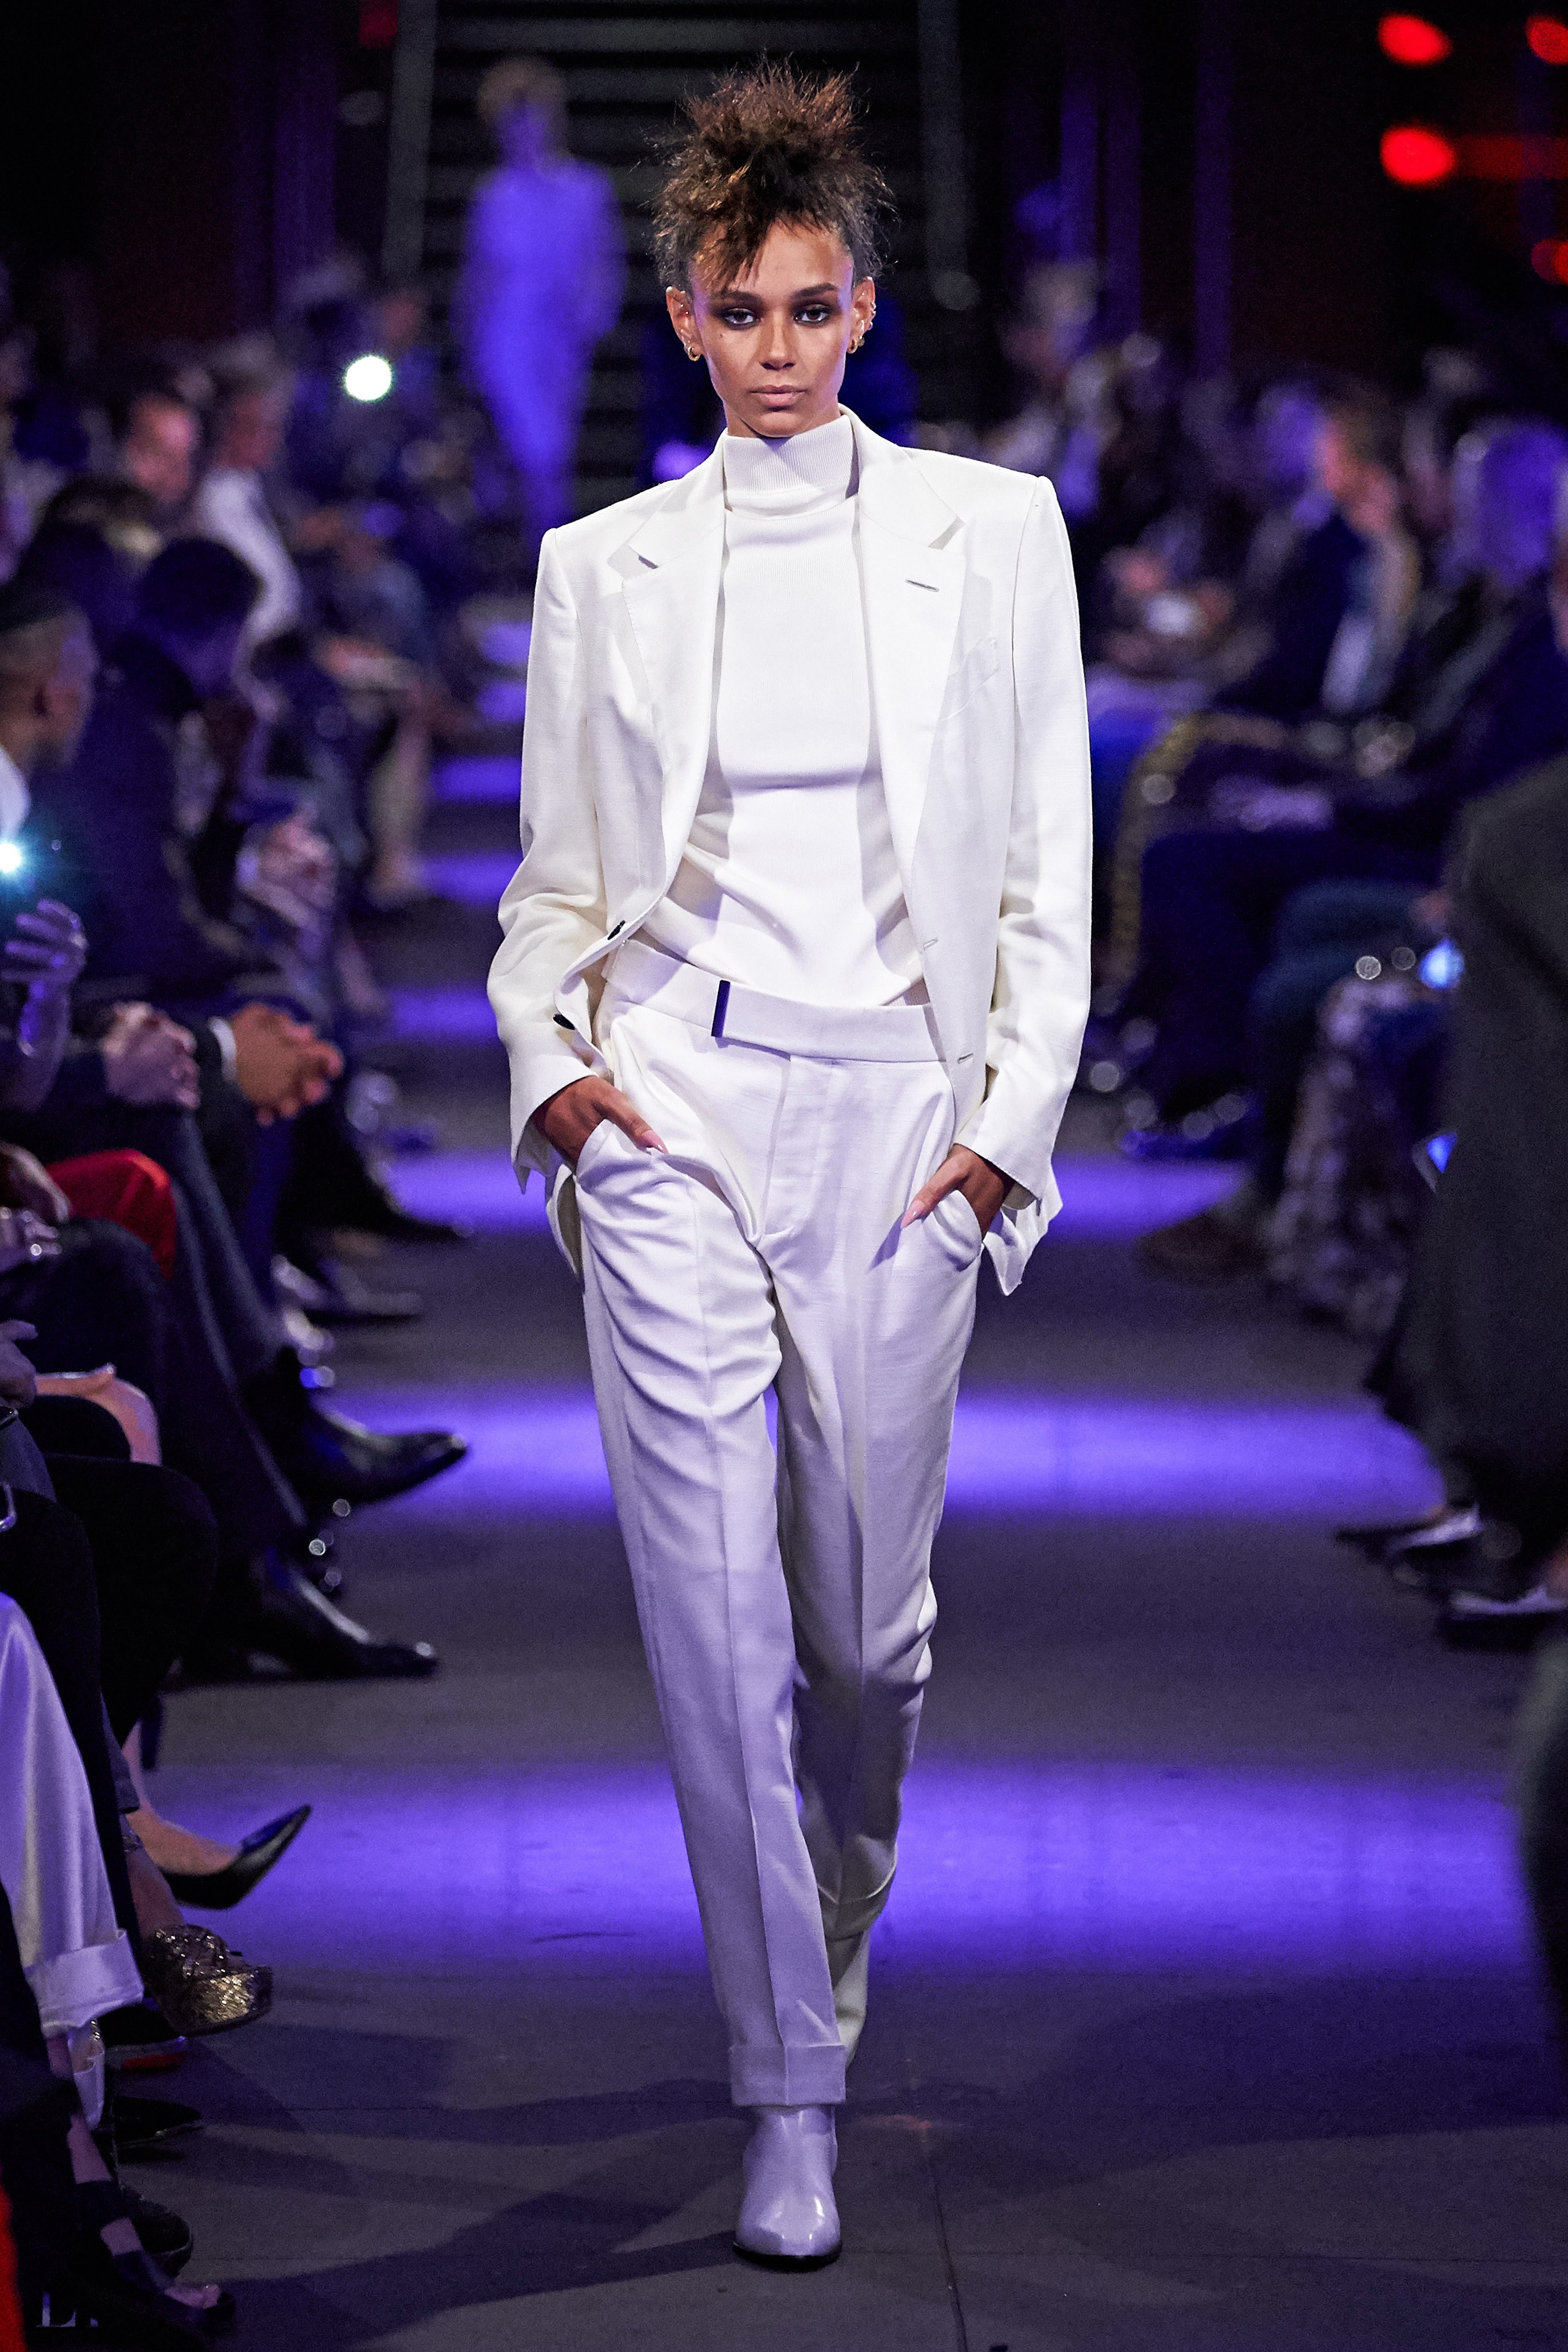 Tom Ford Spring 2020 ready-to-wear